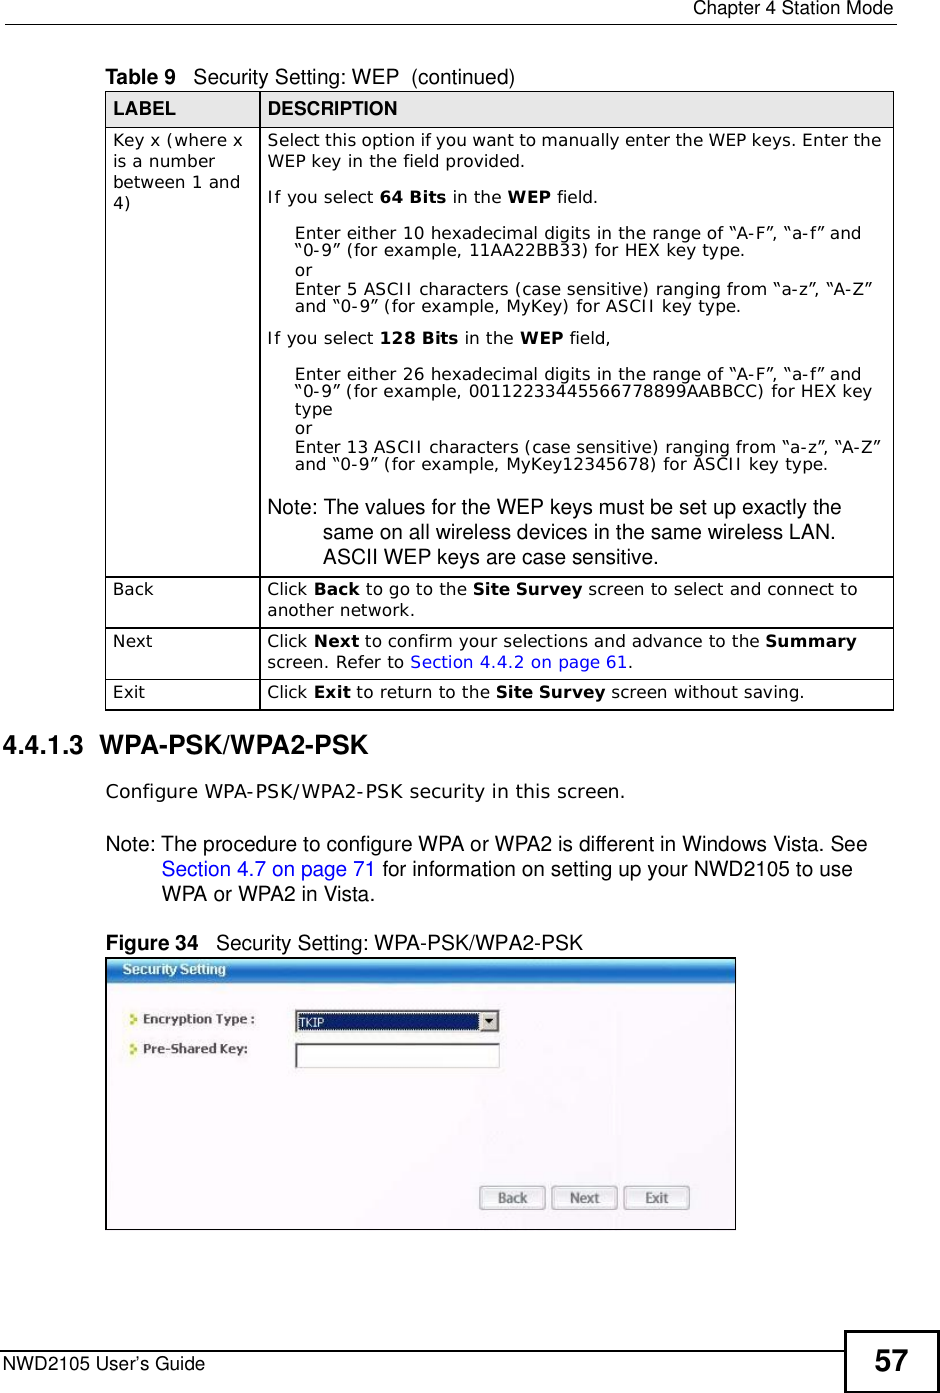  Chapter 4Station ModeNWD2105 User’s Guide 574.4.1.3  WPA-PSK/WPA2-PSKConfigure WPA-PSK/WPA2-PSK security in this screen.Note: The procedure to configure WPA or WPA2 is different in Windows Vista. See Section 4.7 on page 71 for information on setting up your NWD2105 to use WPA or WPA2 in Vista.Figure 34   Security Setting: WPA-PSK/WPA2-PSKKey x (where x is a number between 1 and 4)Select this option if you want to manually enter the WEP keys. Enter the WEP key in the field provided.If you select 64 Bits in the WEP field.Enter either 10 hexadecimal digits in the range of “A-F”, “a-f” and “0-9” (for example, 11AA22BB33) for HEX key type.orEnter 5 ASCII characters (case sensitive) ranging from “a-z”, “A-Z” and “0-9” (for example, MyKey) for ASCII key type. If you select 128 Bits in the WEP field,Enter either 26 hexadecimal digits in the range of “A-F”, “a-f” and “0-9” (for example, 00112233445566778899AABBCC) for HEX key typeorEnter 13 ASCII characters (case sensitive) ranging from “a-z”, “A-Z” and “0-9” (for example, MyKey12345678) for ASCII key type.Note: The values for the WEP keys must be set up exactly the same on all wireless devices in the same wireless LAN. ASCII WEP keys are case sensitive.BackClick Back to go to the Site Survey screen to select and connect to another network.NextClick Next to confirm your selections and advance to the Summary screen. Refer to Section 4.4.2 on page 61.ExitClick Exit to return to the Site Survey screen without saving.Table 9   Security Setting: WEP  (continued)LABEL DESCRIPTION